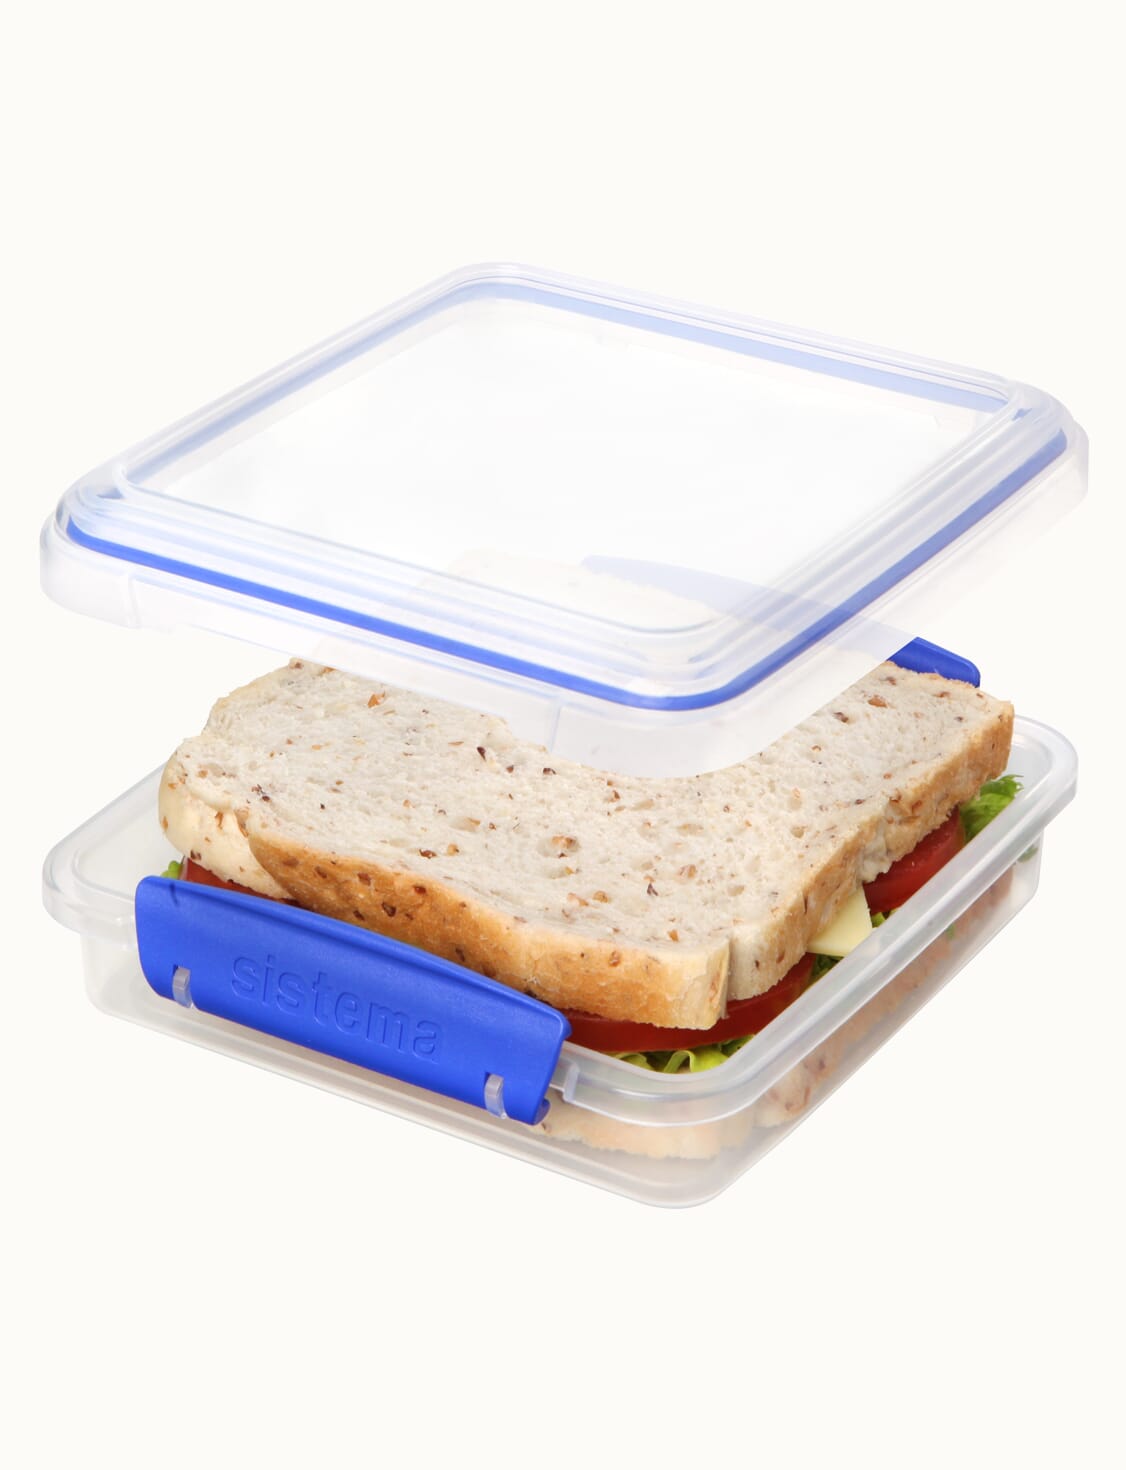 https://stergita.sirv.com/sistema/catalog/product/1/6/1645_450ml_sandwich_box_food_sandwich_angle_exploded_1.png?canvas.color=fcfbf8